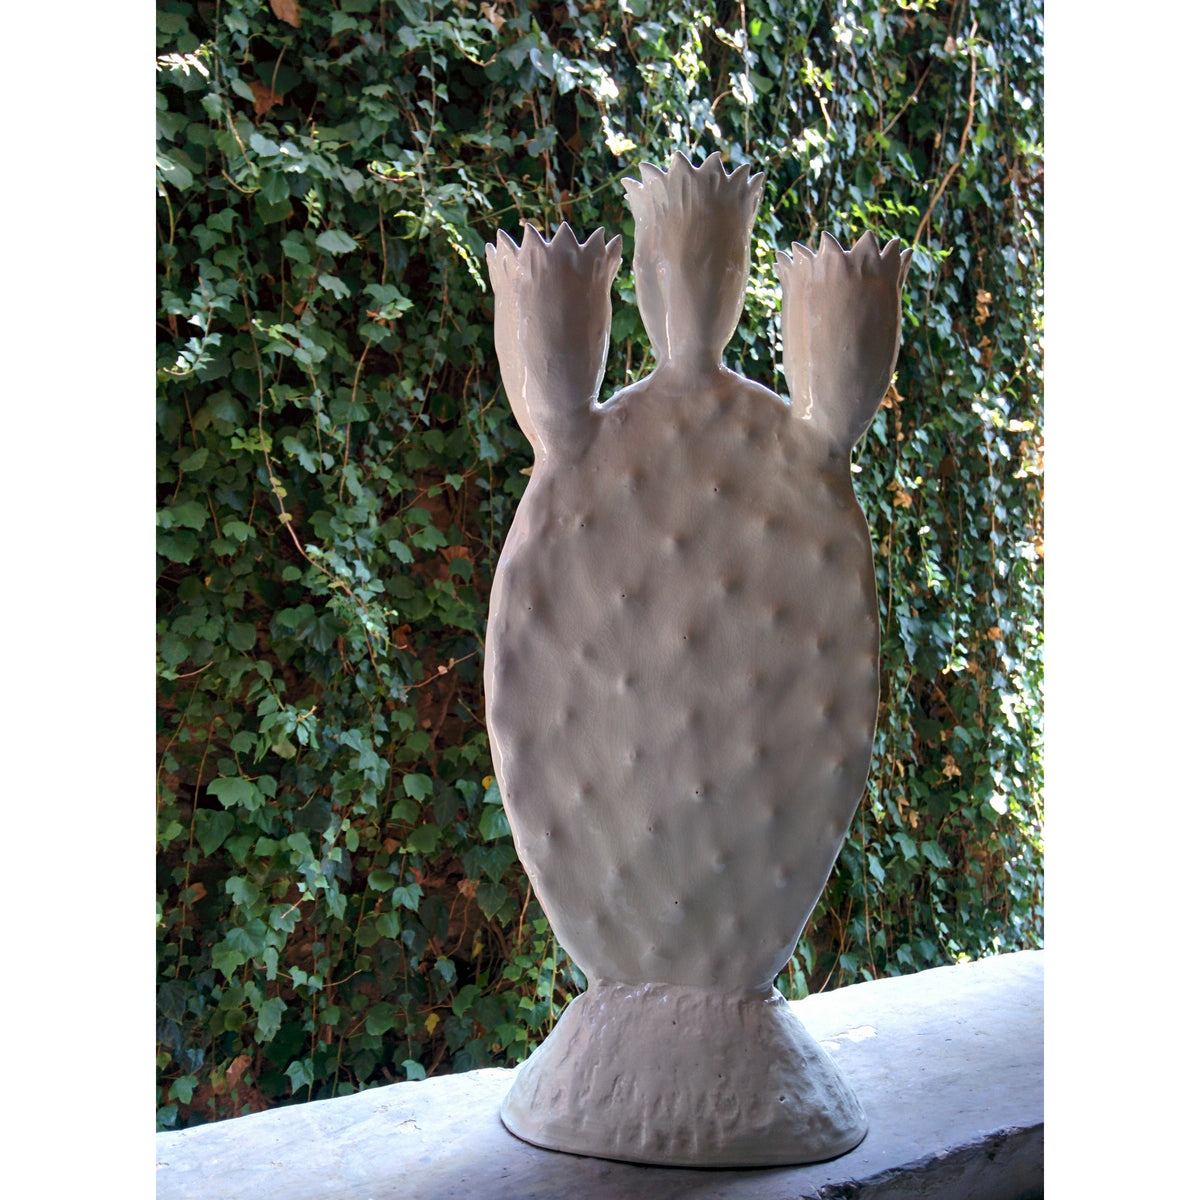 Prickly Pear White Candle Holder - AGATA TREASURES Vertical